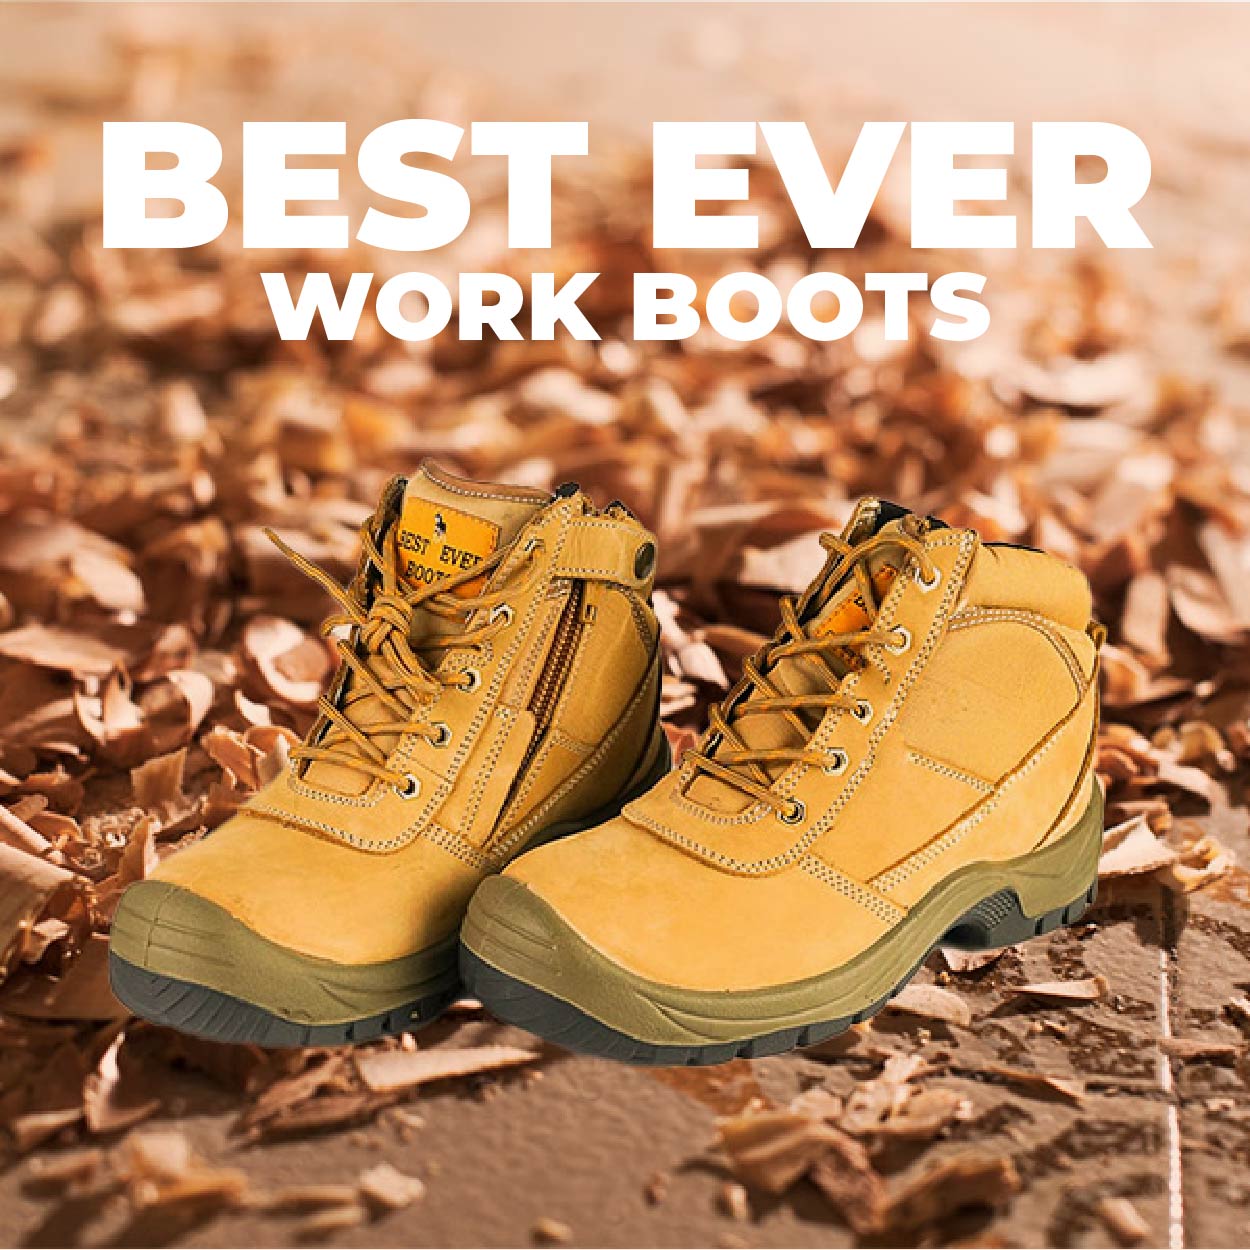 Best Ever Work Boots